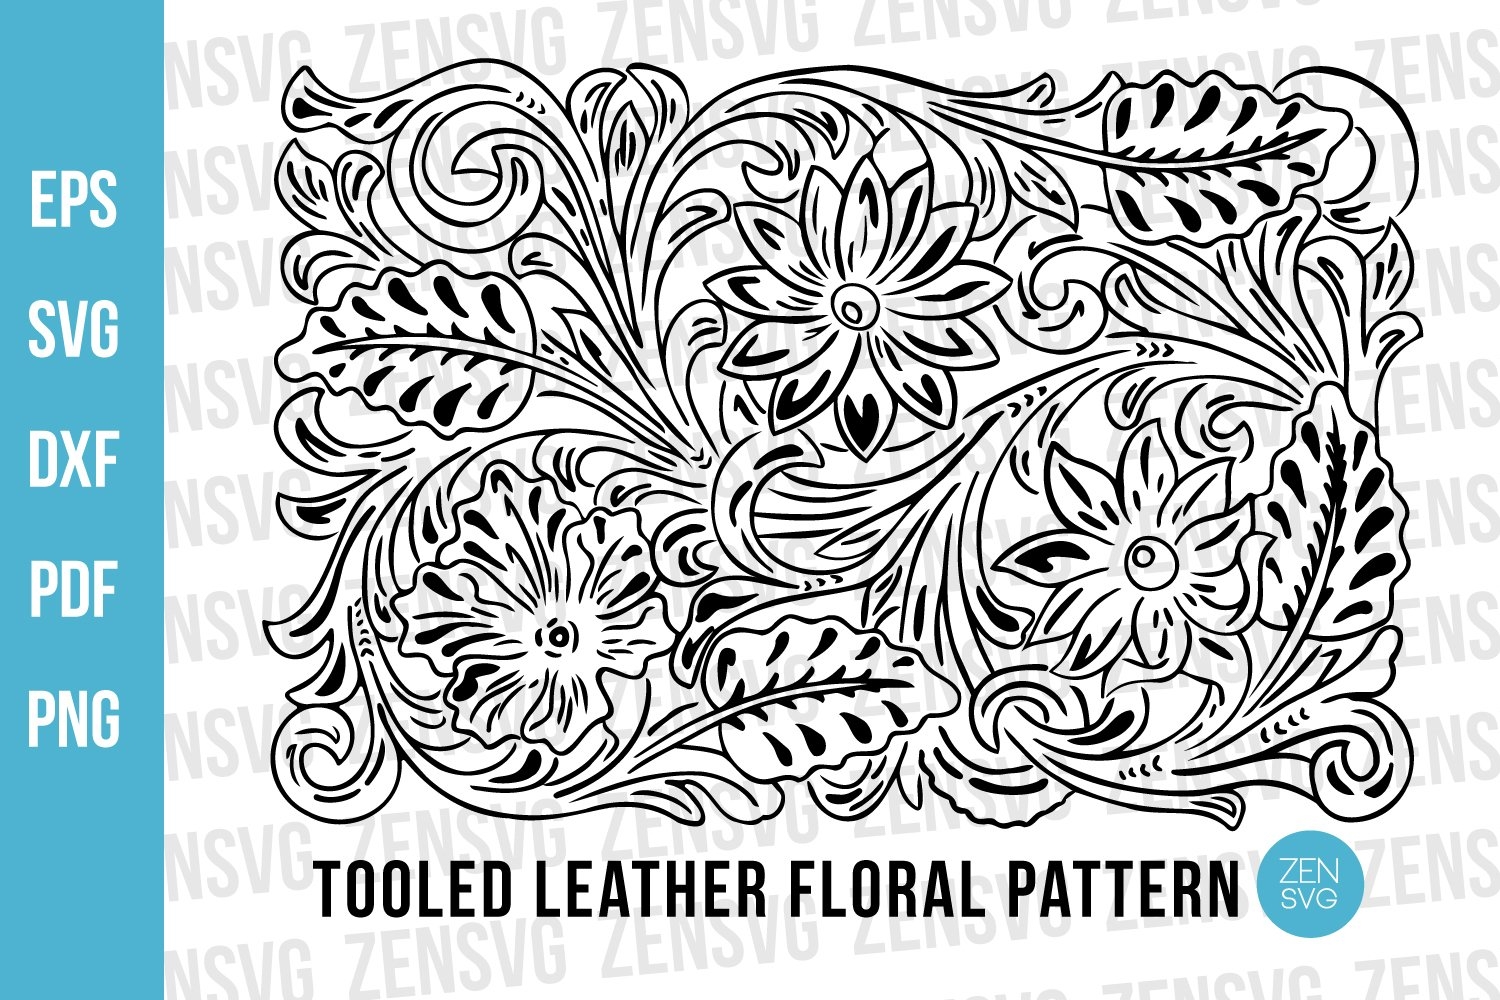 Printable Leather Floral Patterns